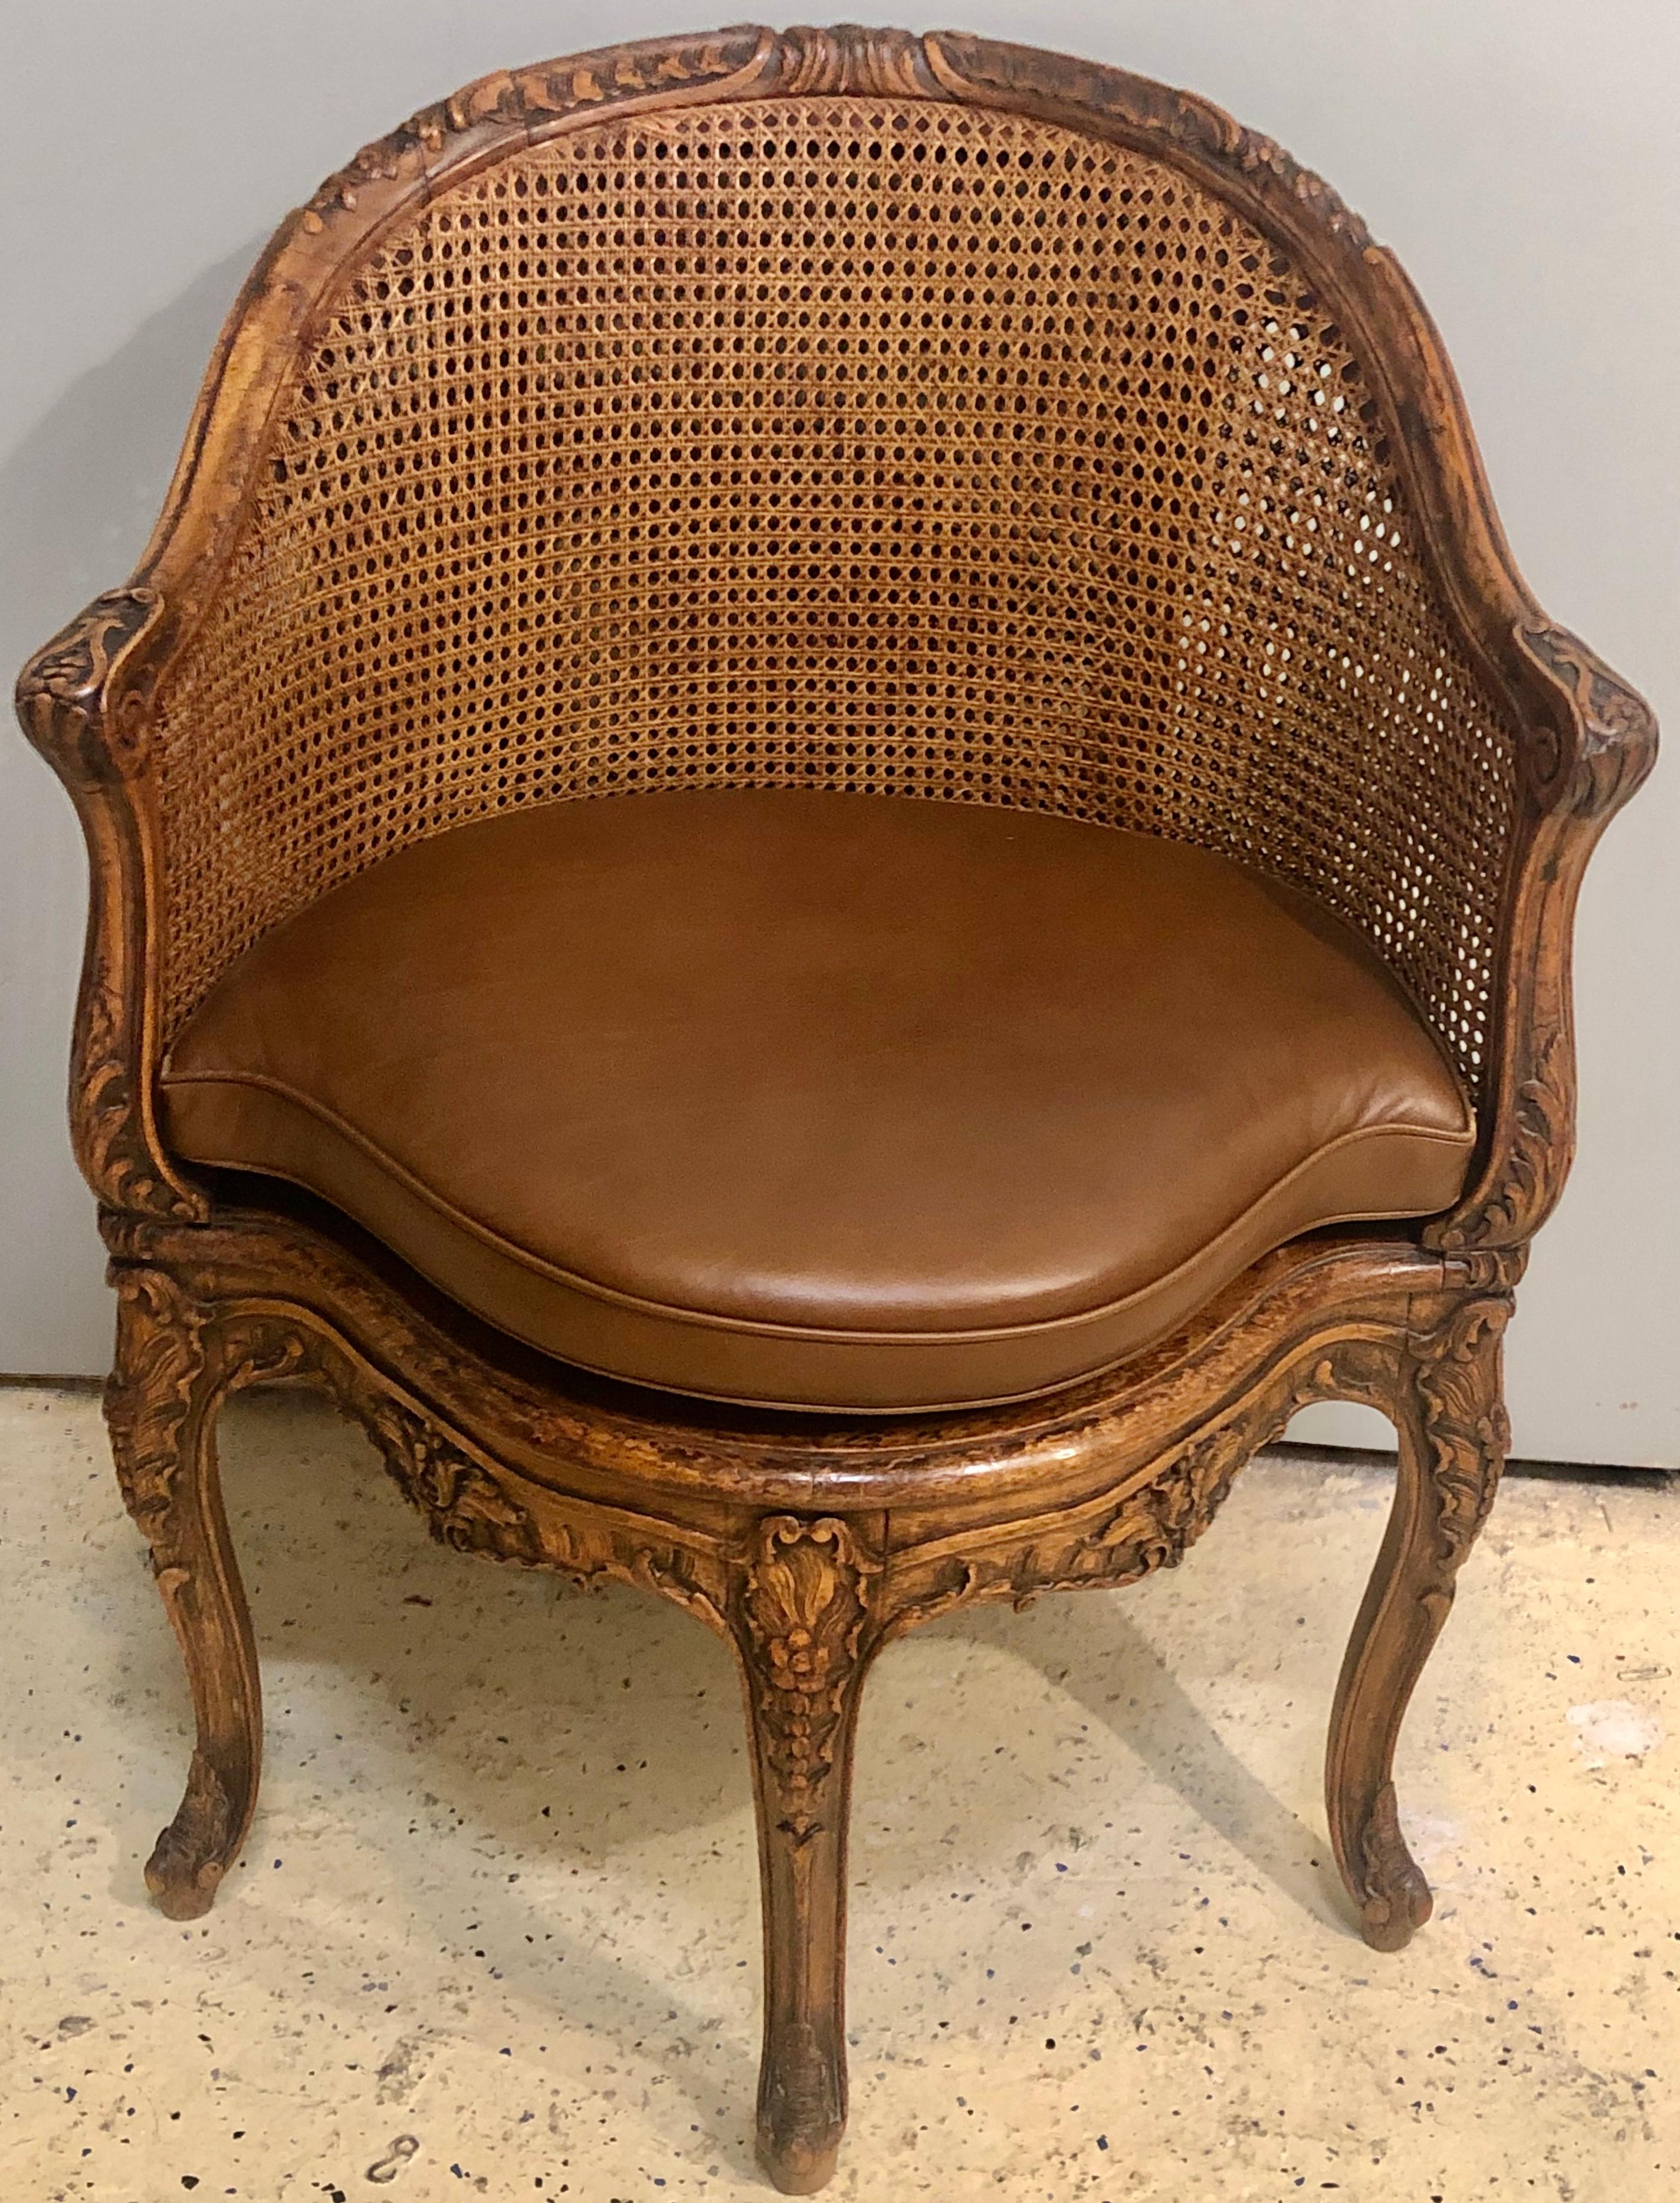 18th century French caned bergère de Bureau. A Louie XV beechwood bergère de Bureau with leather squab cushion, circa 1740. Magnificently carved. One of two presently available.

Please see: 
Sale #18793
The Collector: Property from Four